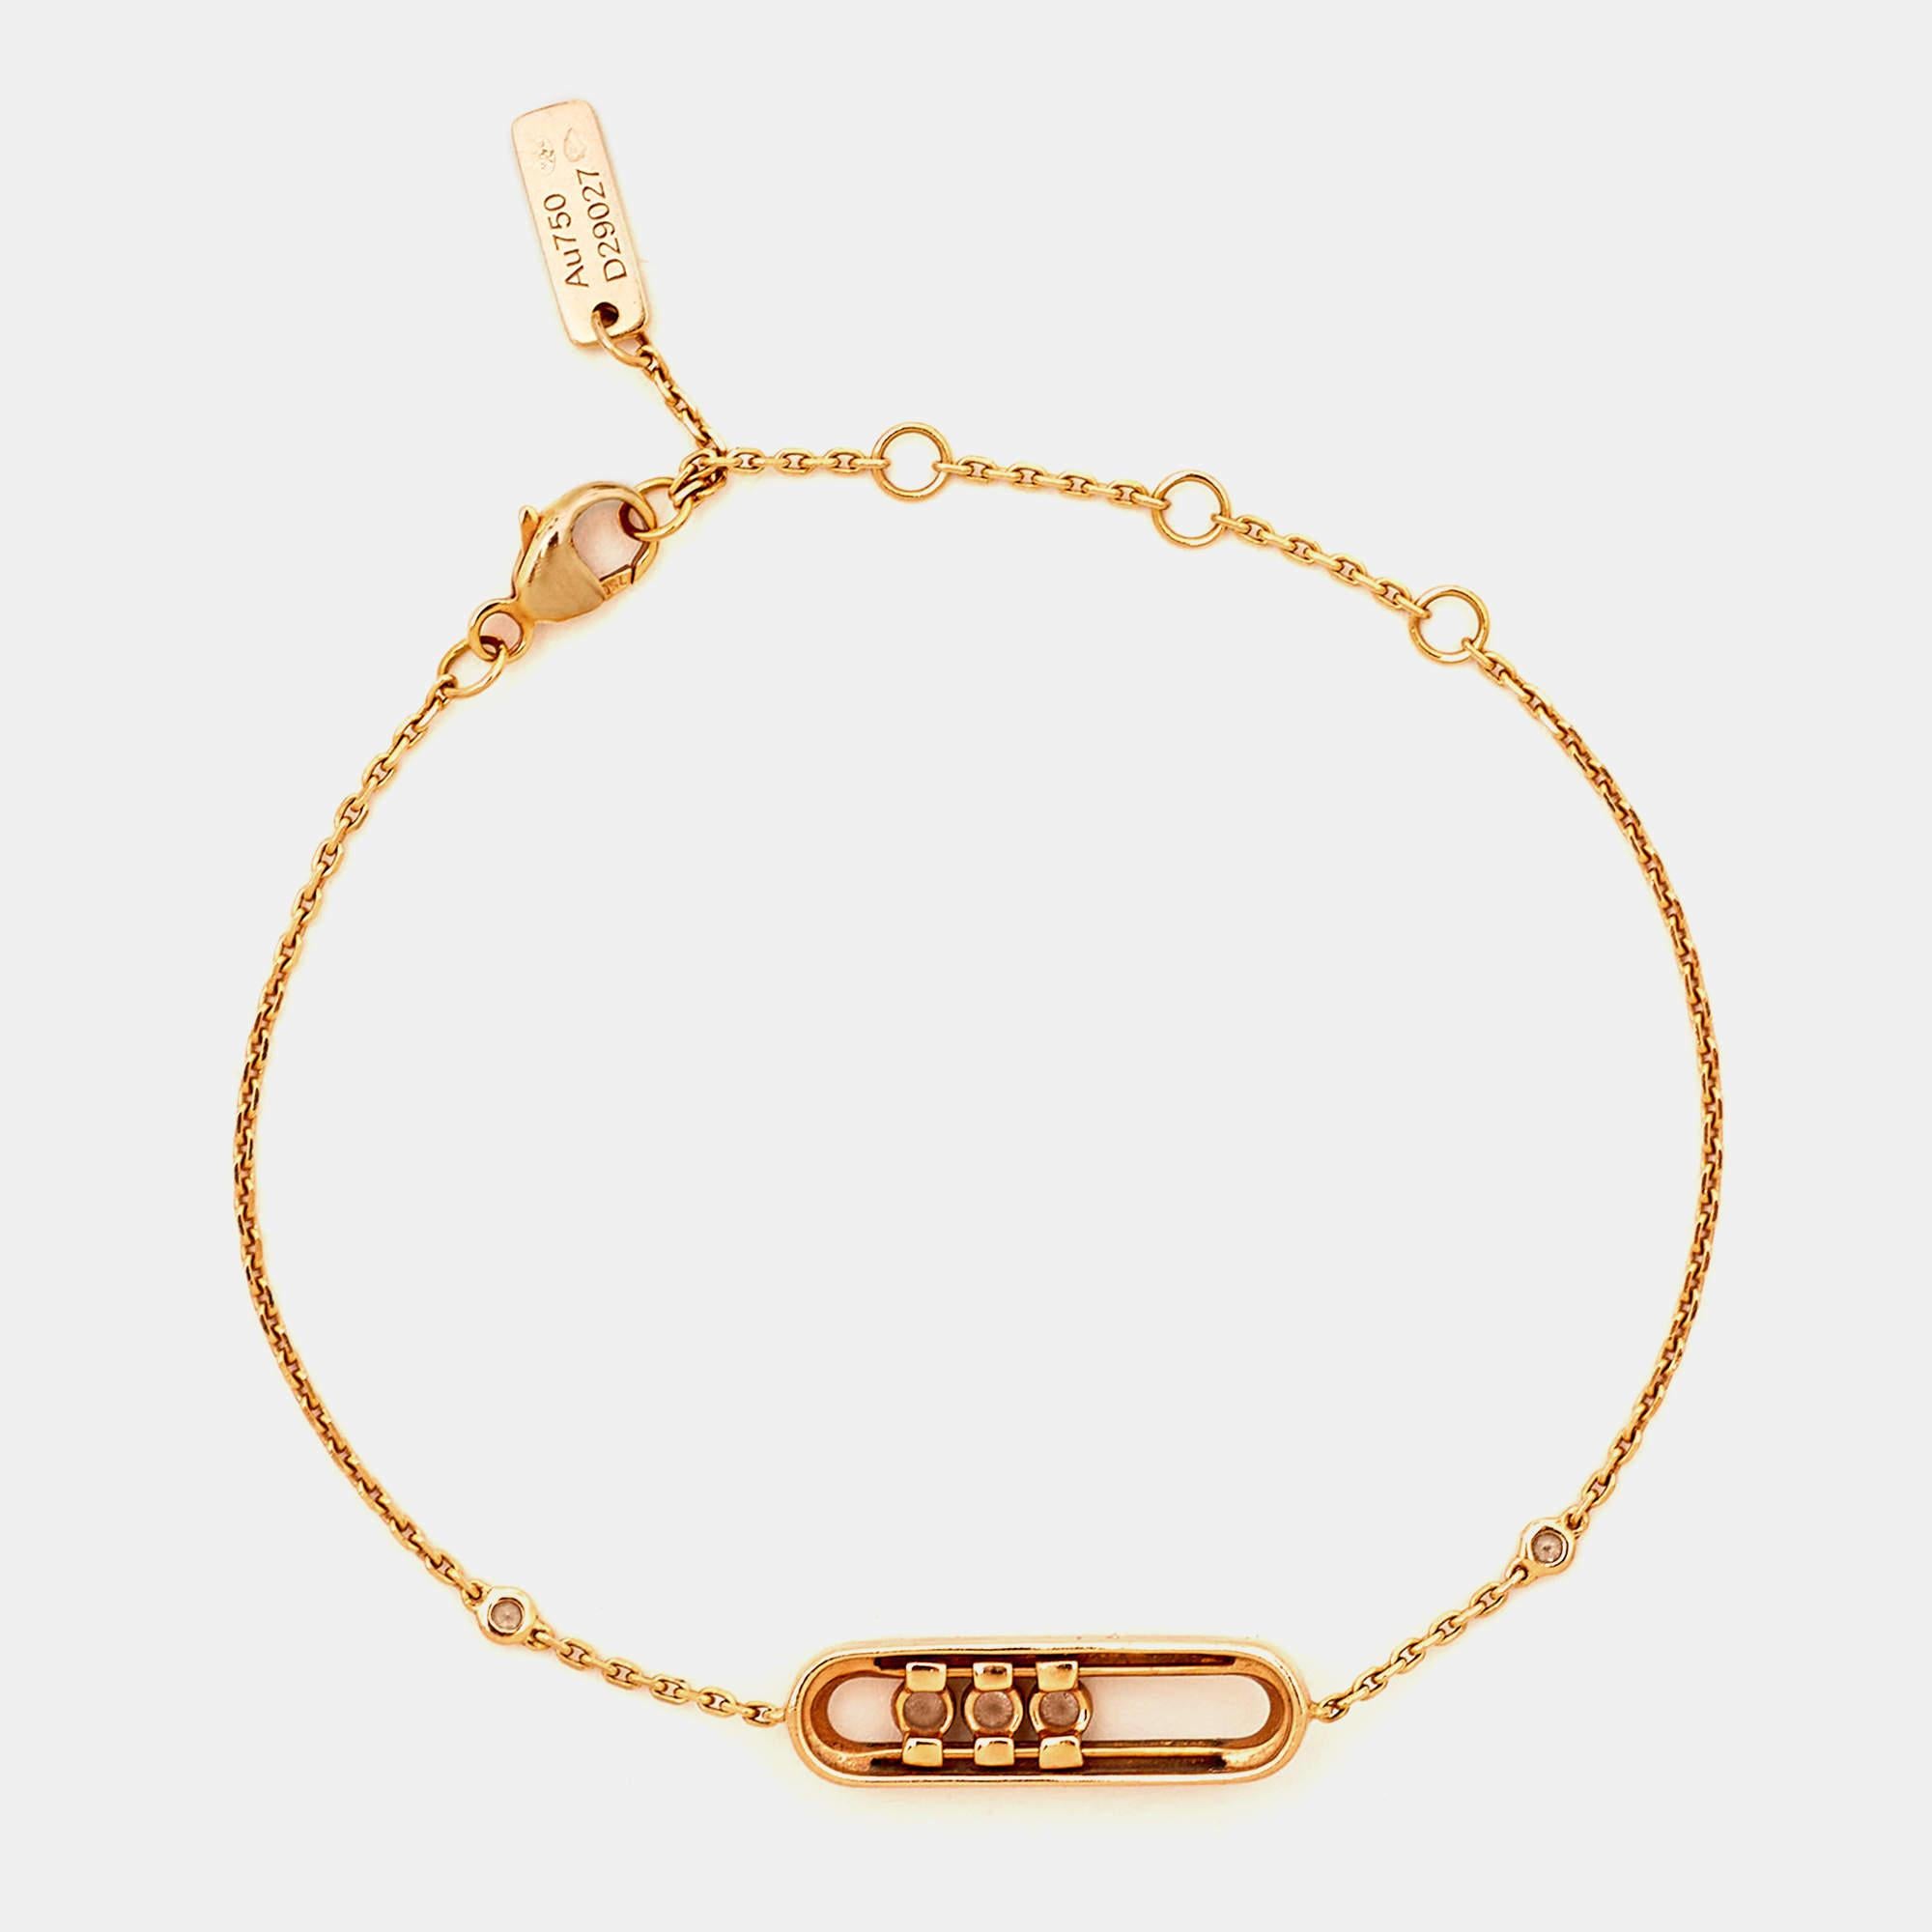 The Move is an iconic collection of house Messika, a line that embodies love and romance through three moving diamonds set in simple designs. This beautiful bracelet is fully handcrafted from 18k rose gold into a minimal yet timeless silhouette